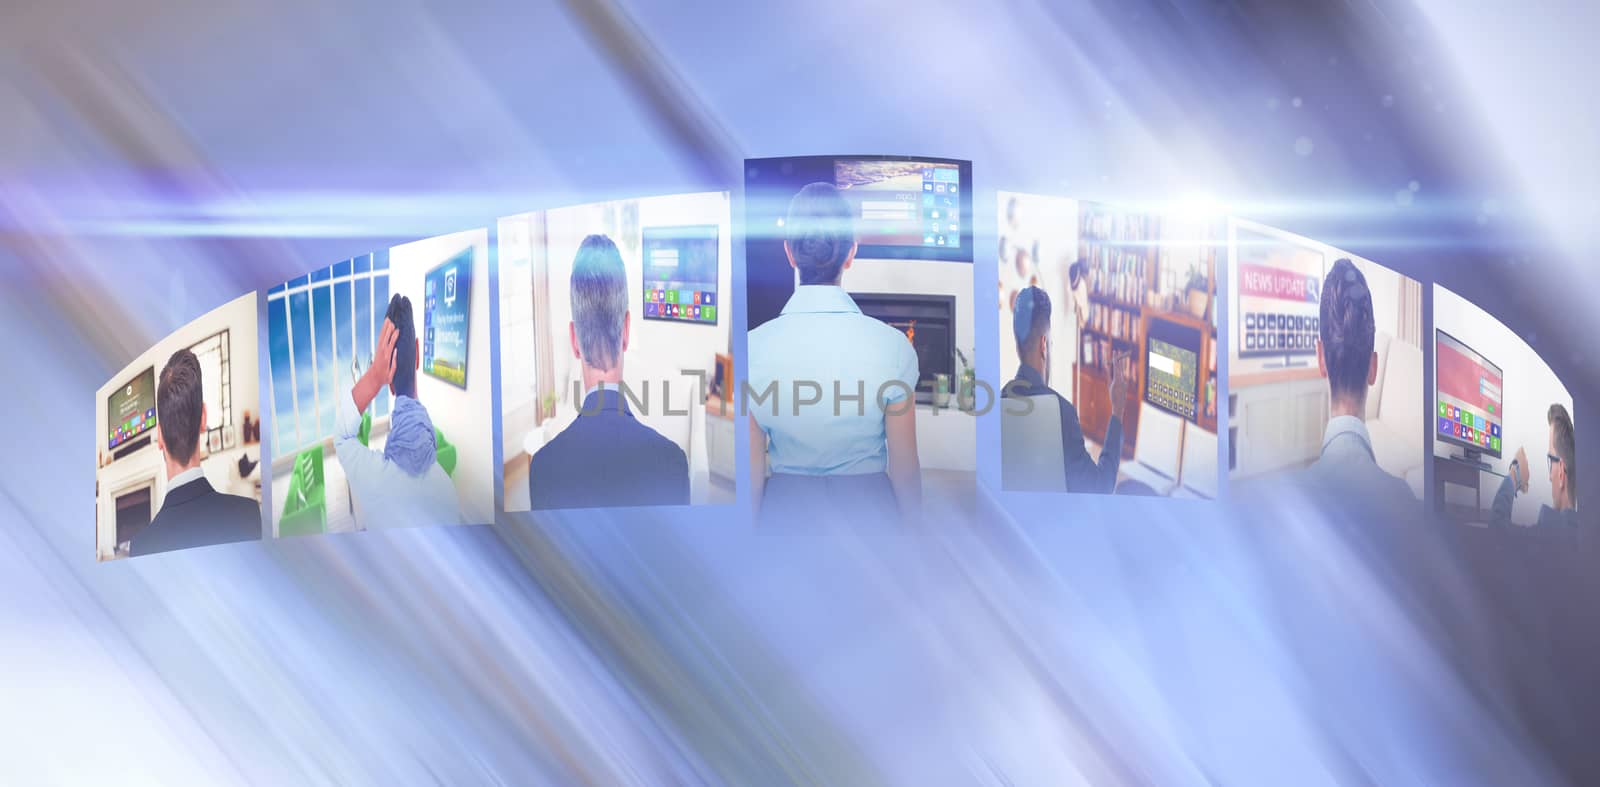 Composite image of digitally generated image of various screens representing business people by Wavebreakmedia